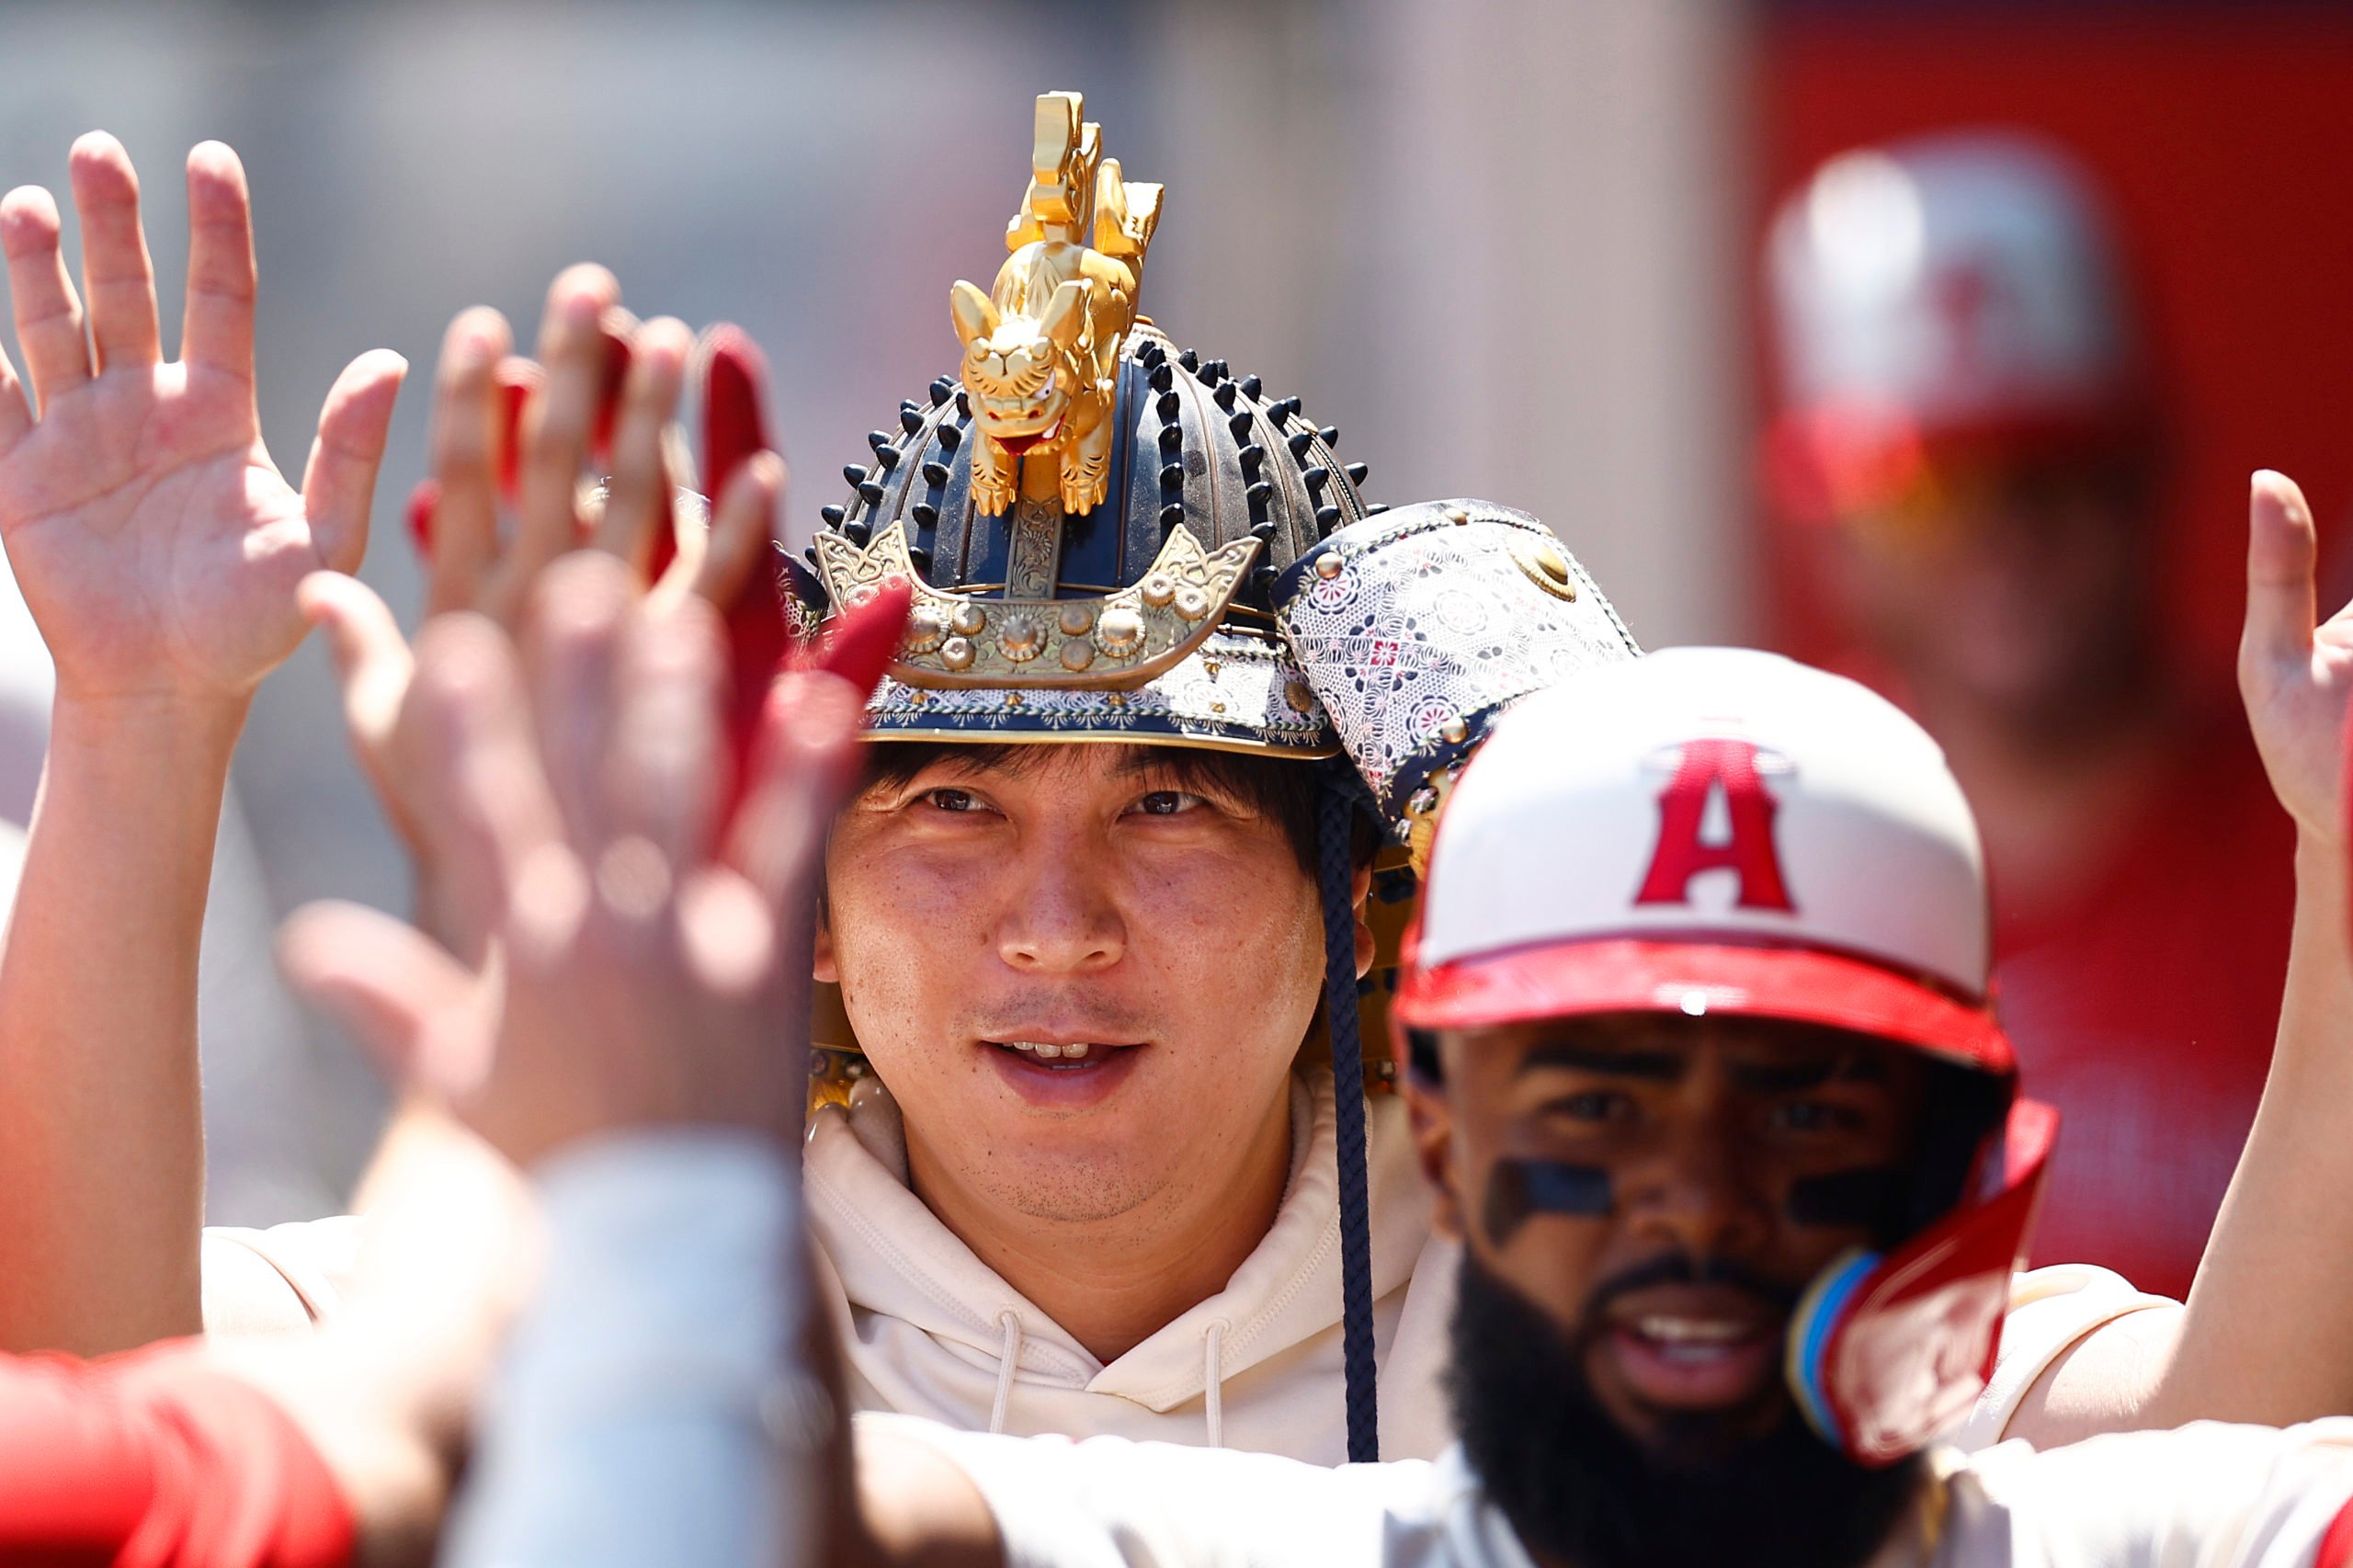 ANAHEIM, CALIFORNIA - AUGUST 23: Ippei Mizuhara, interpreter for Shohei Ohtani #17 of the Los Angeles Angels in the first inning during game one of a doubleheader at Angel Stadium of Anaheim on August 23, 2023 in Anaheim, California. Ronald Martinez/Getty Images